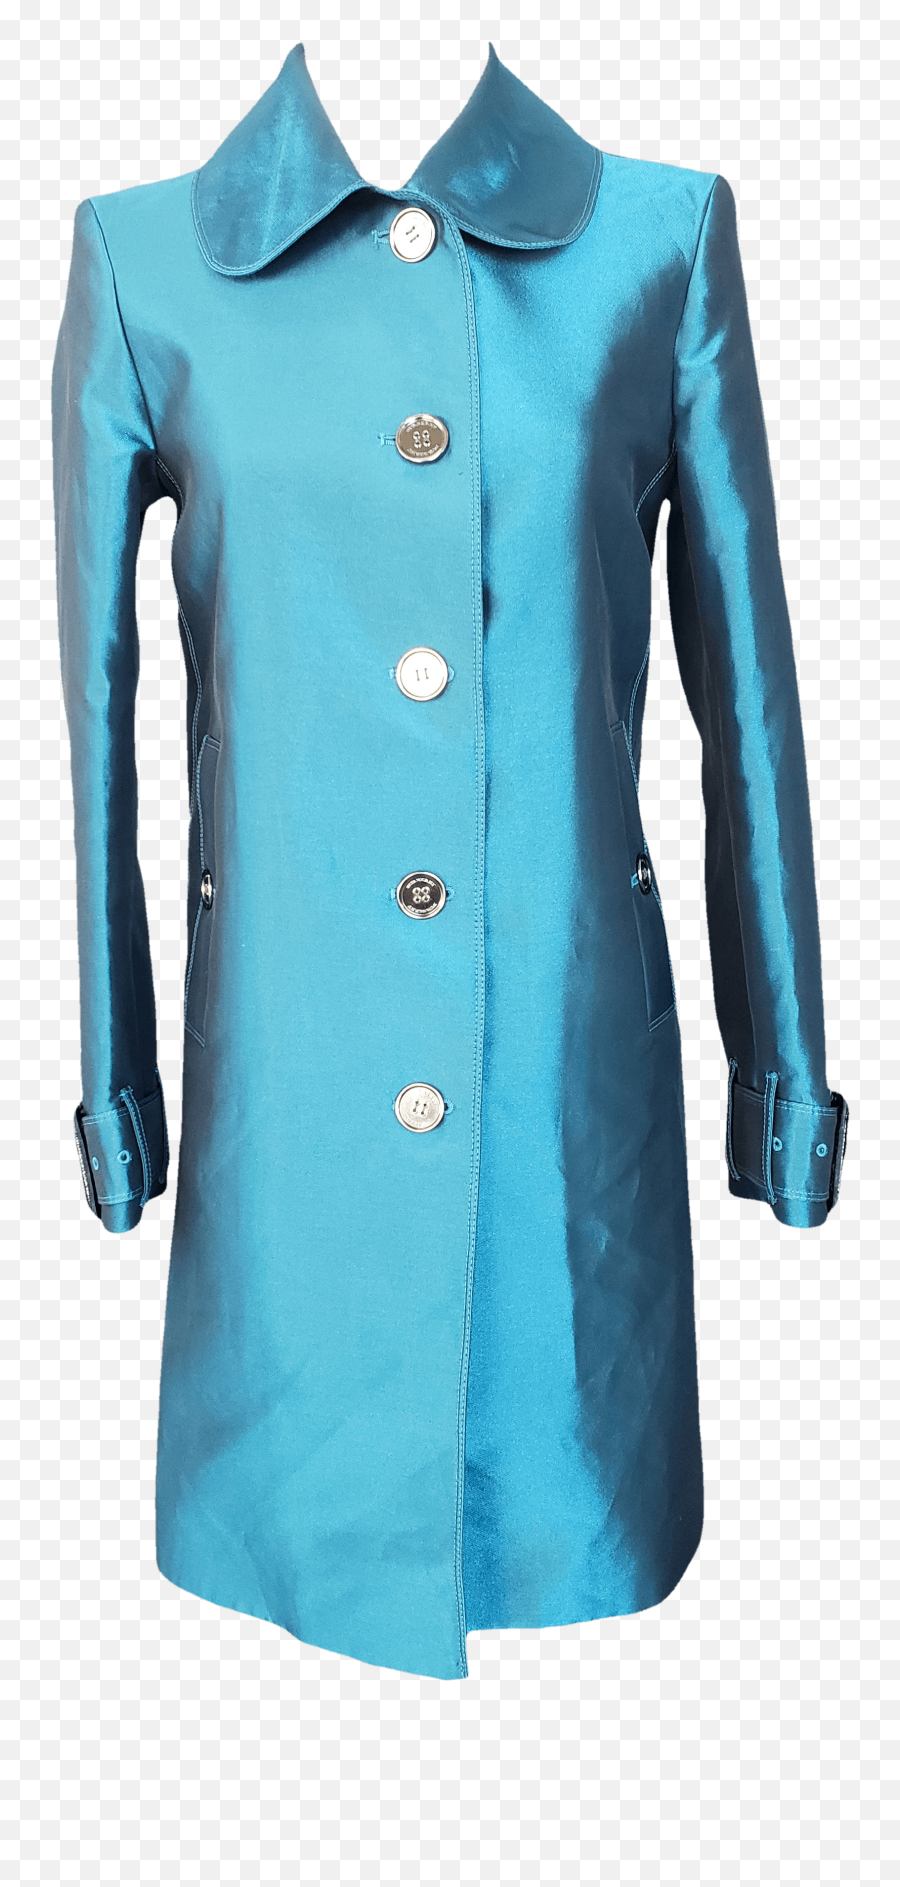 Shiny Teal Trench Coat By Burberry - Overcoat Png,Trench Coat Png